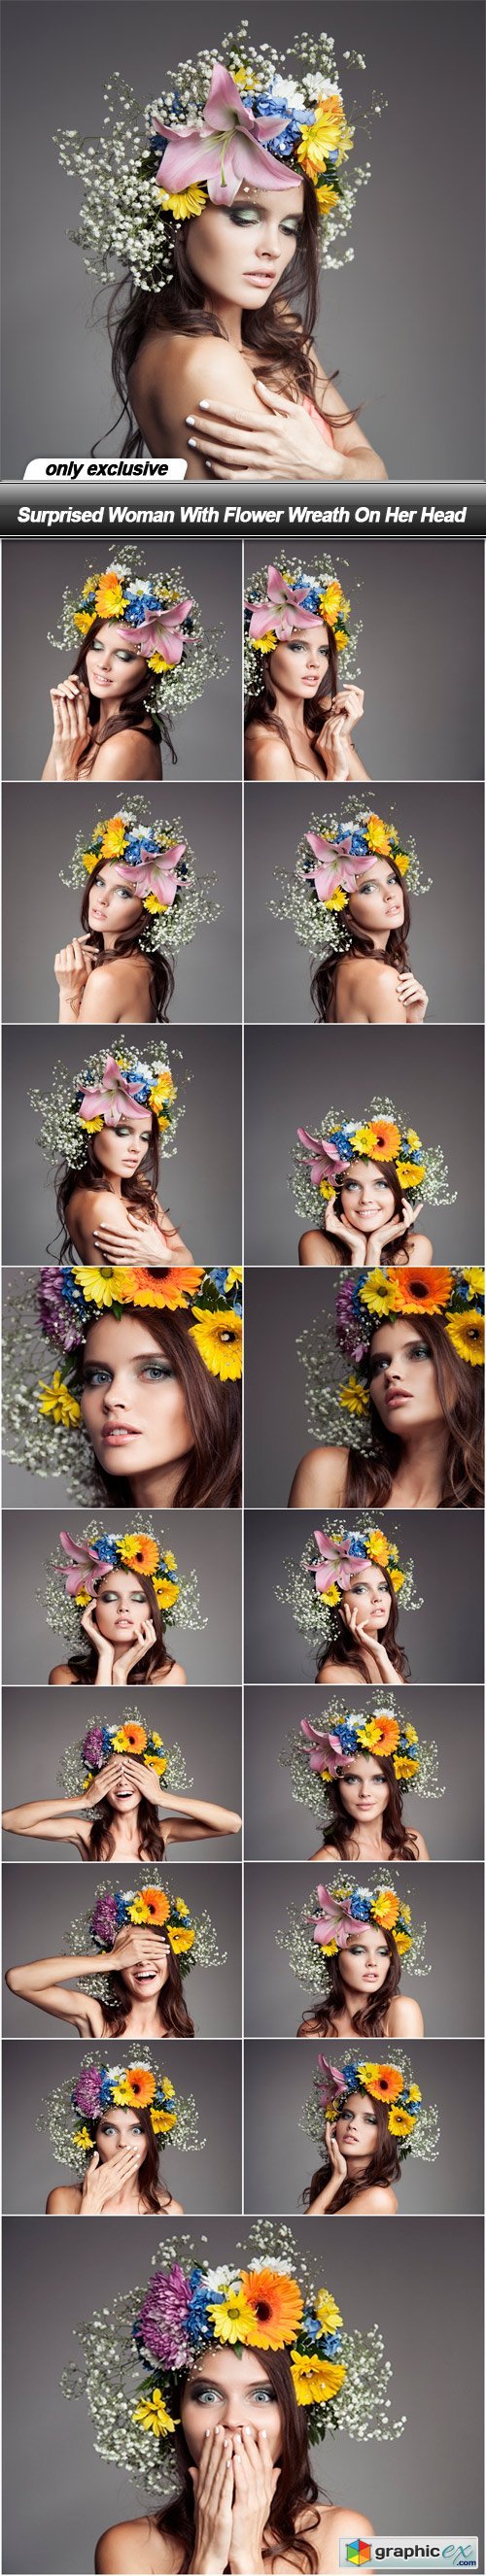 Surprised Woman With Flower Wreath On Her Head - 17 UHQ JPEG